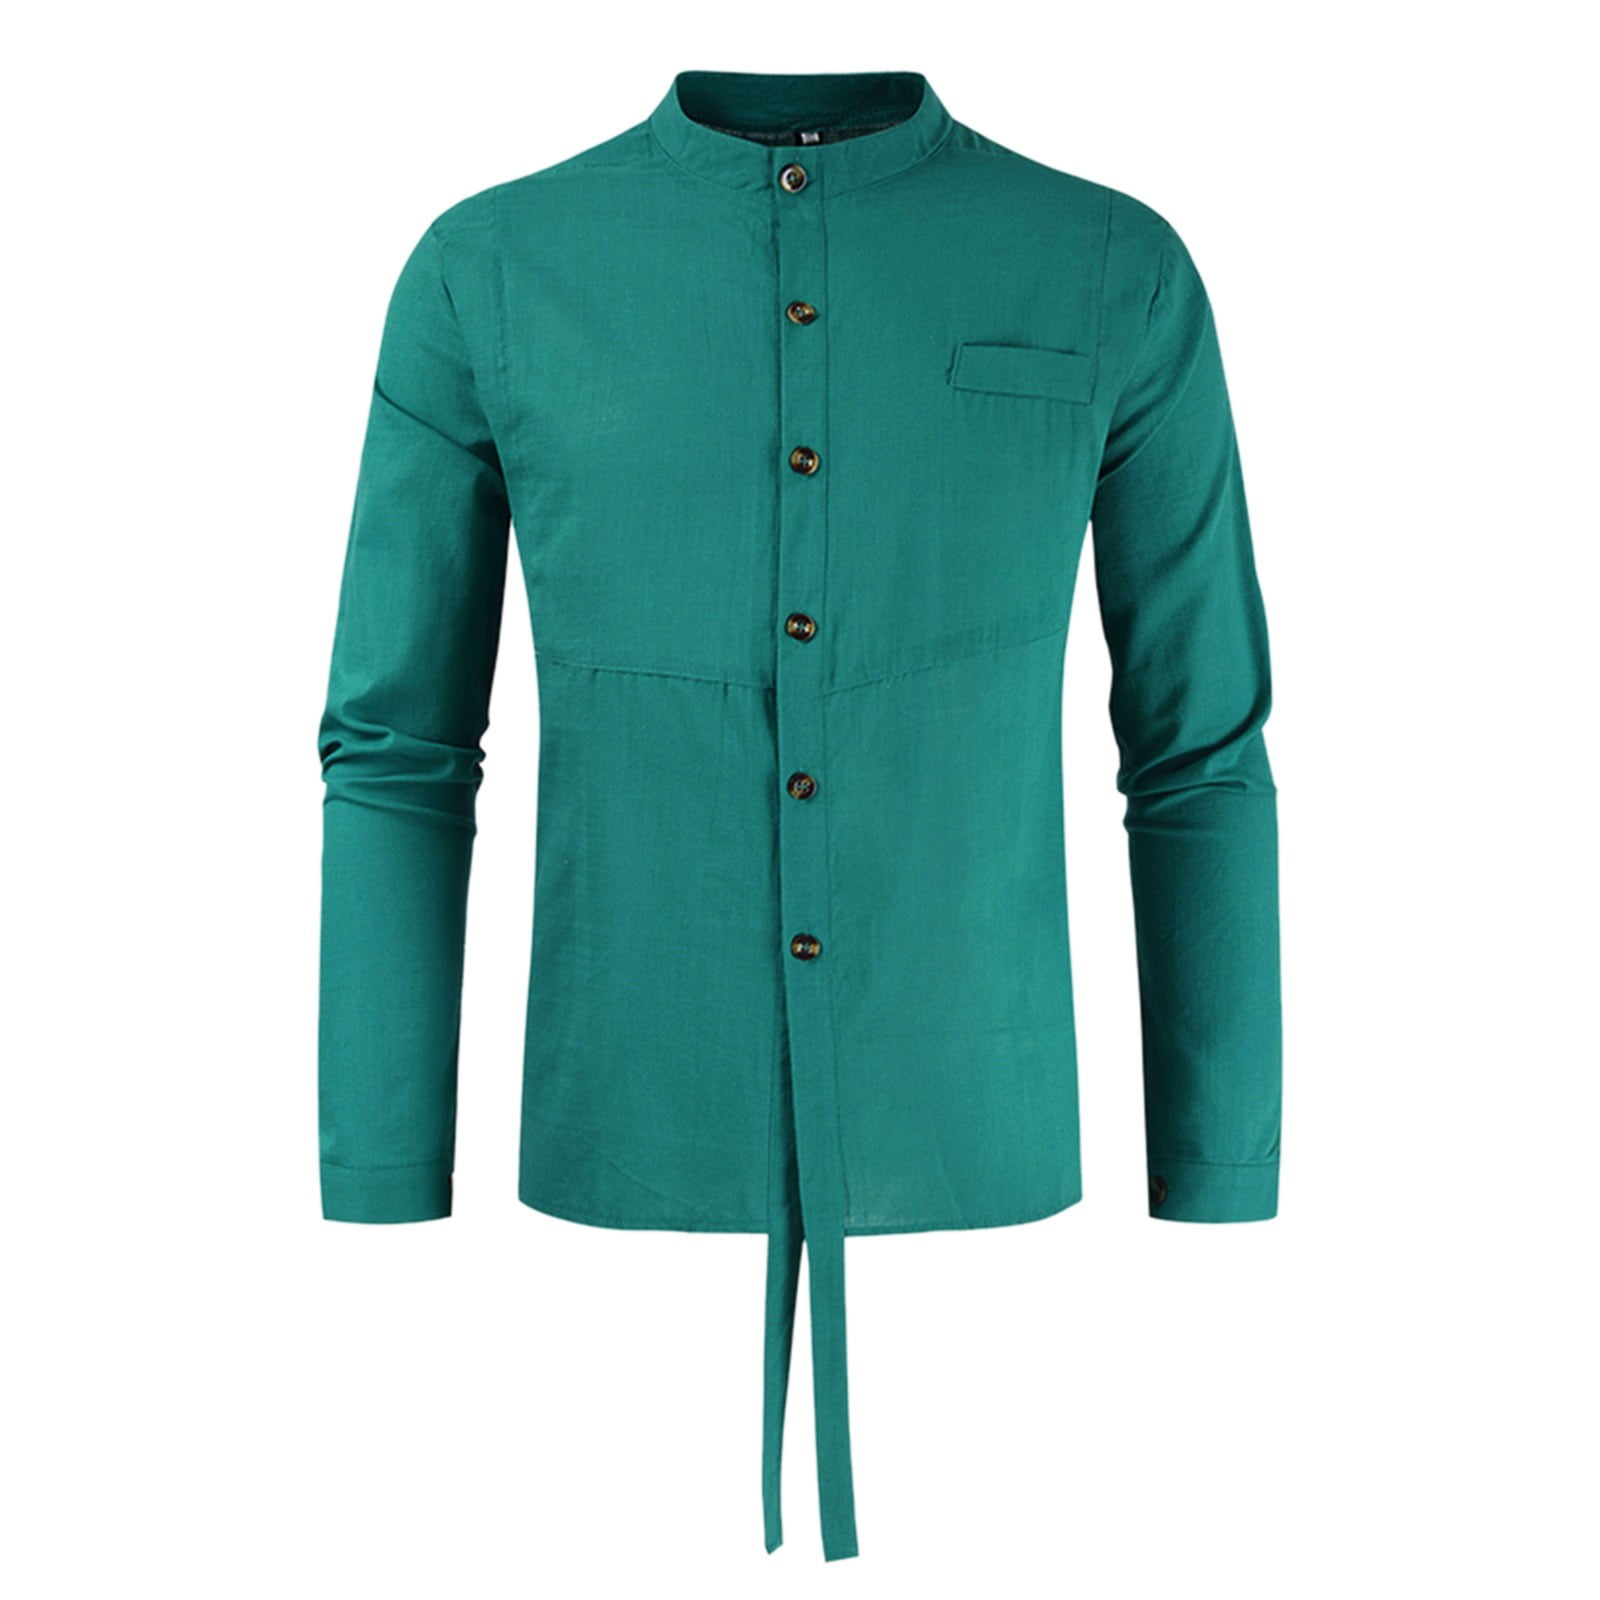 Regular-fit Solid Button Long-sleeved Shirt Stand-up Collar Color Men's ...